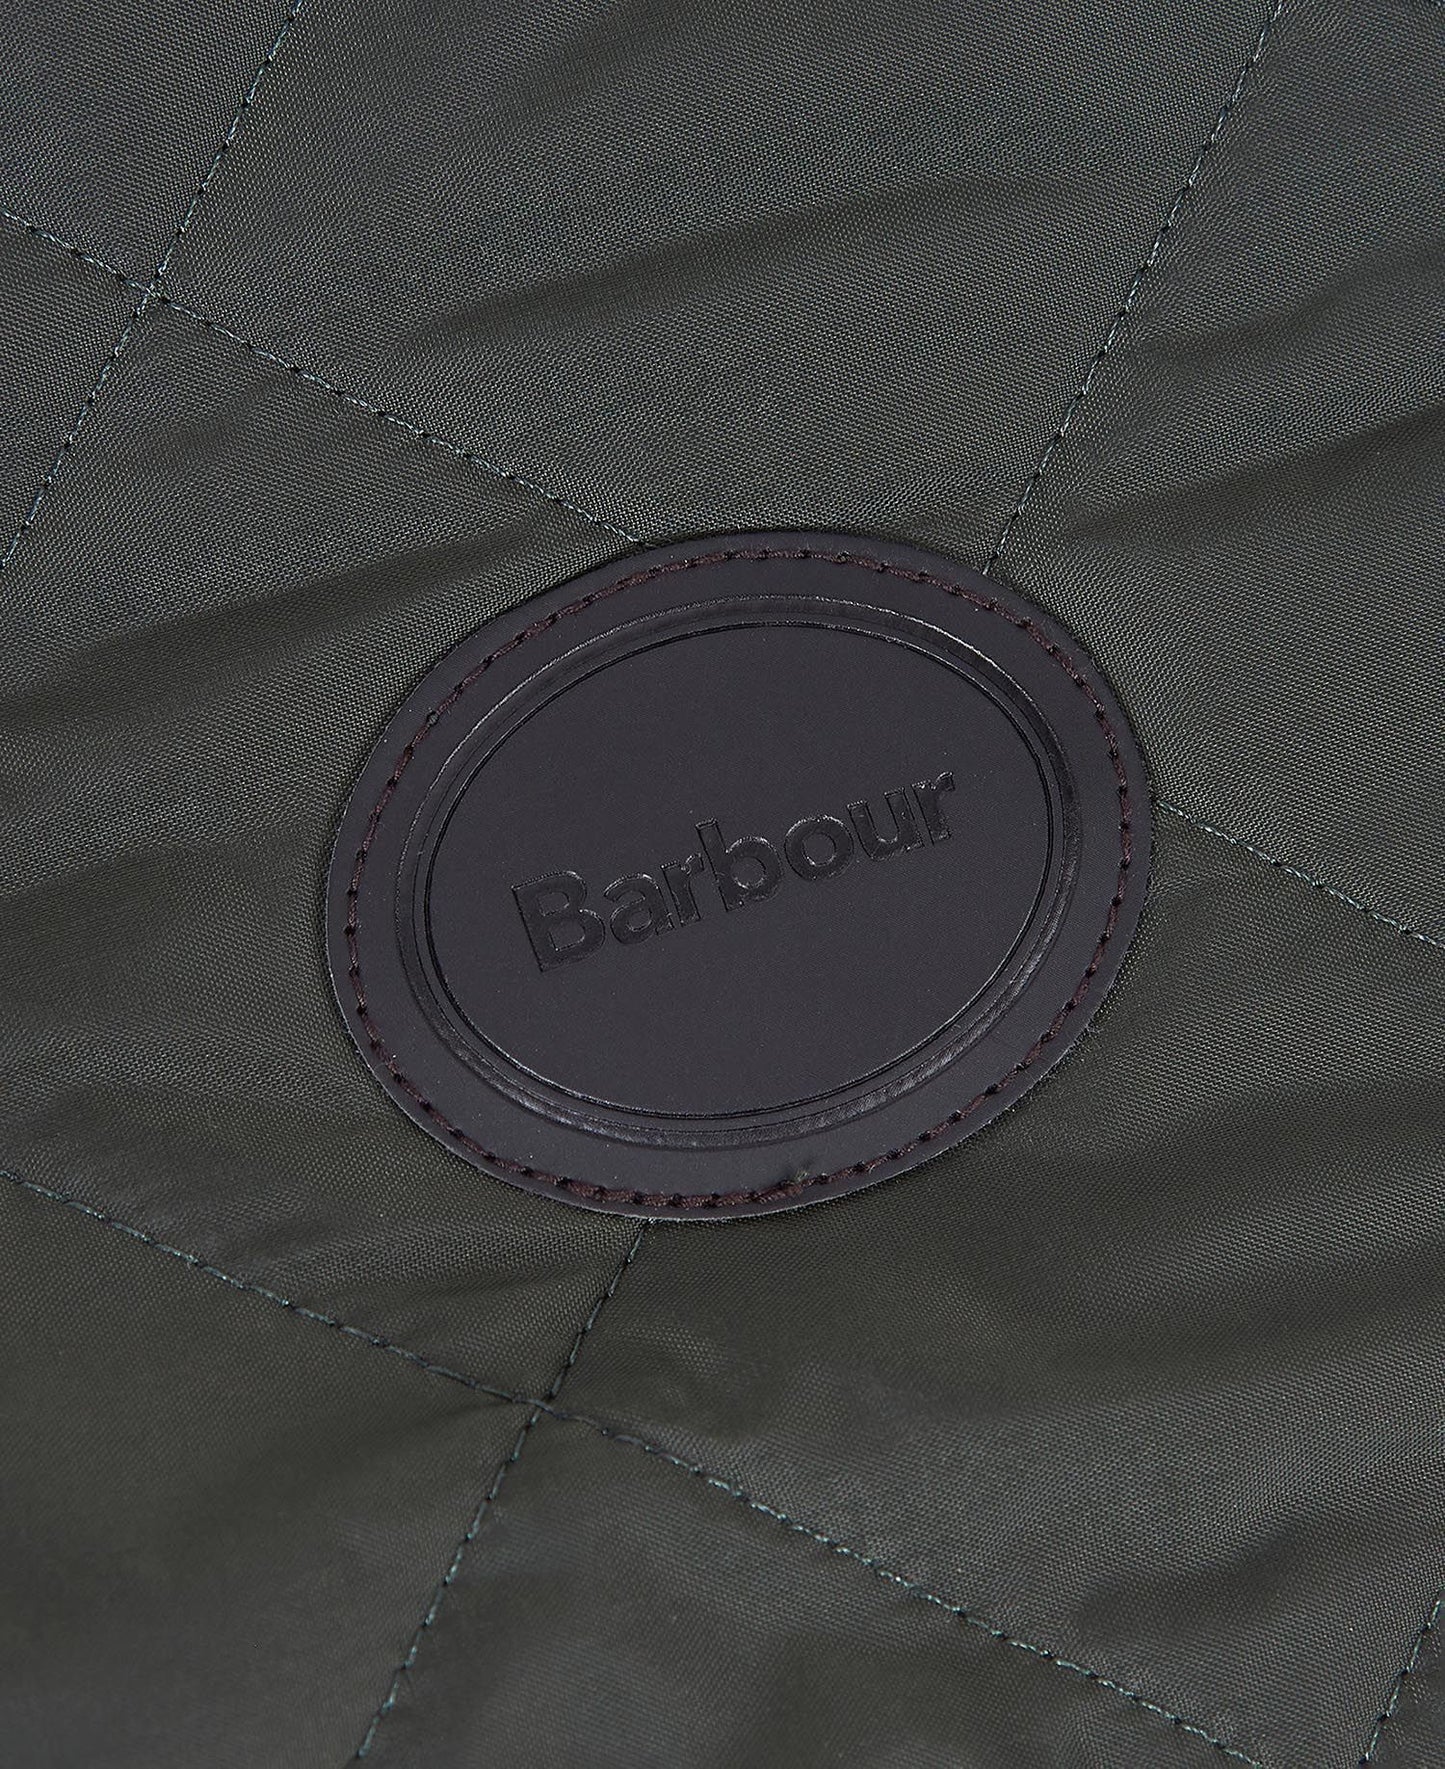 BARBOUR QUILTED DOG COAT - OLIVE